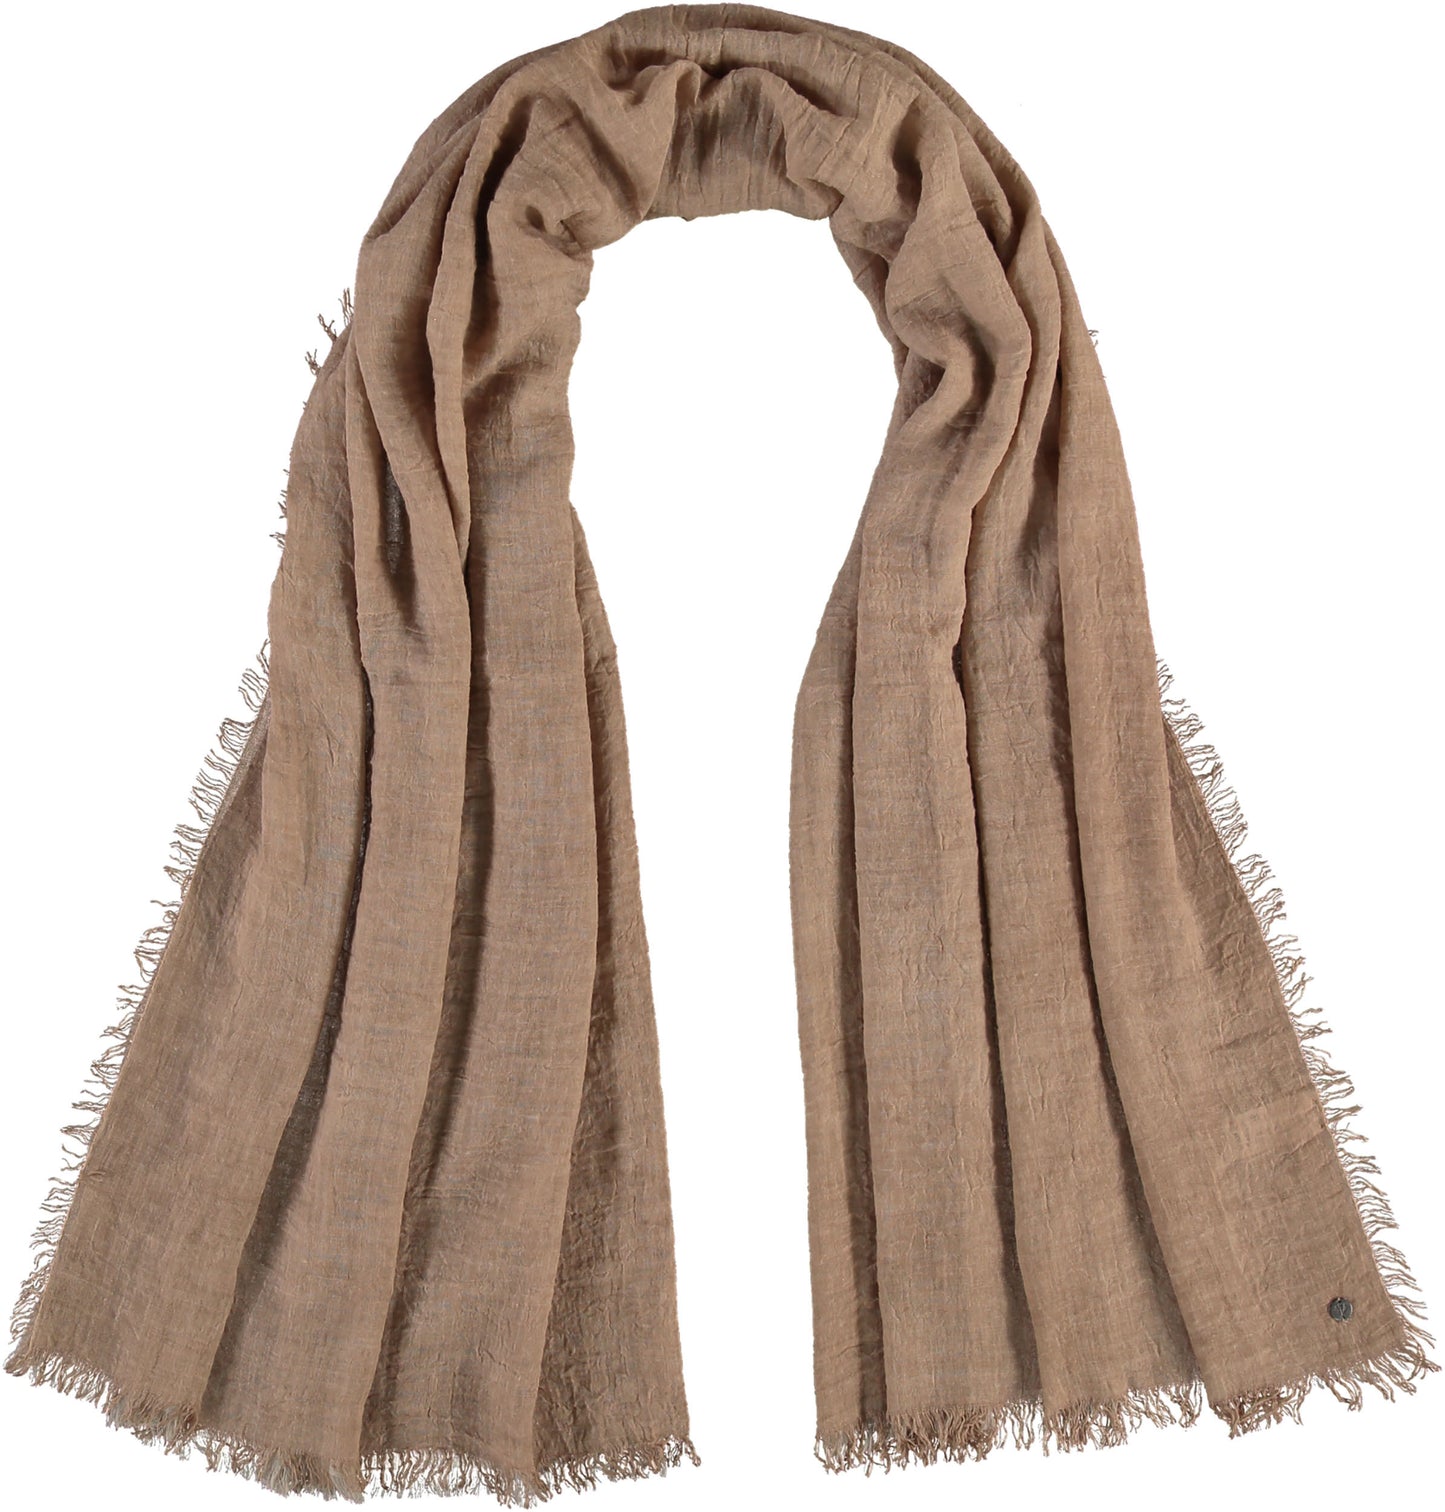 Super soft fine scarf in camel by Fraas